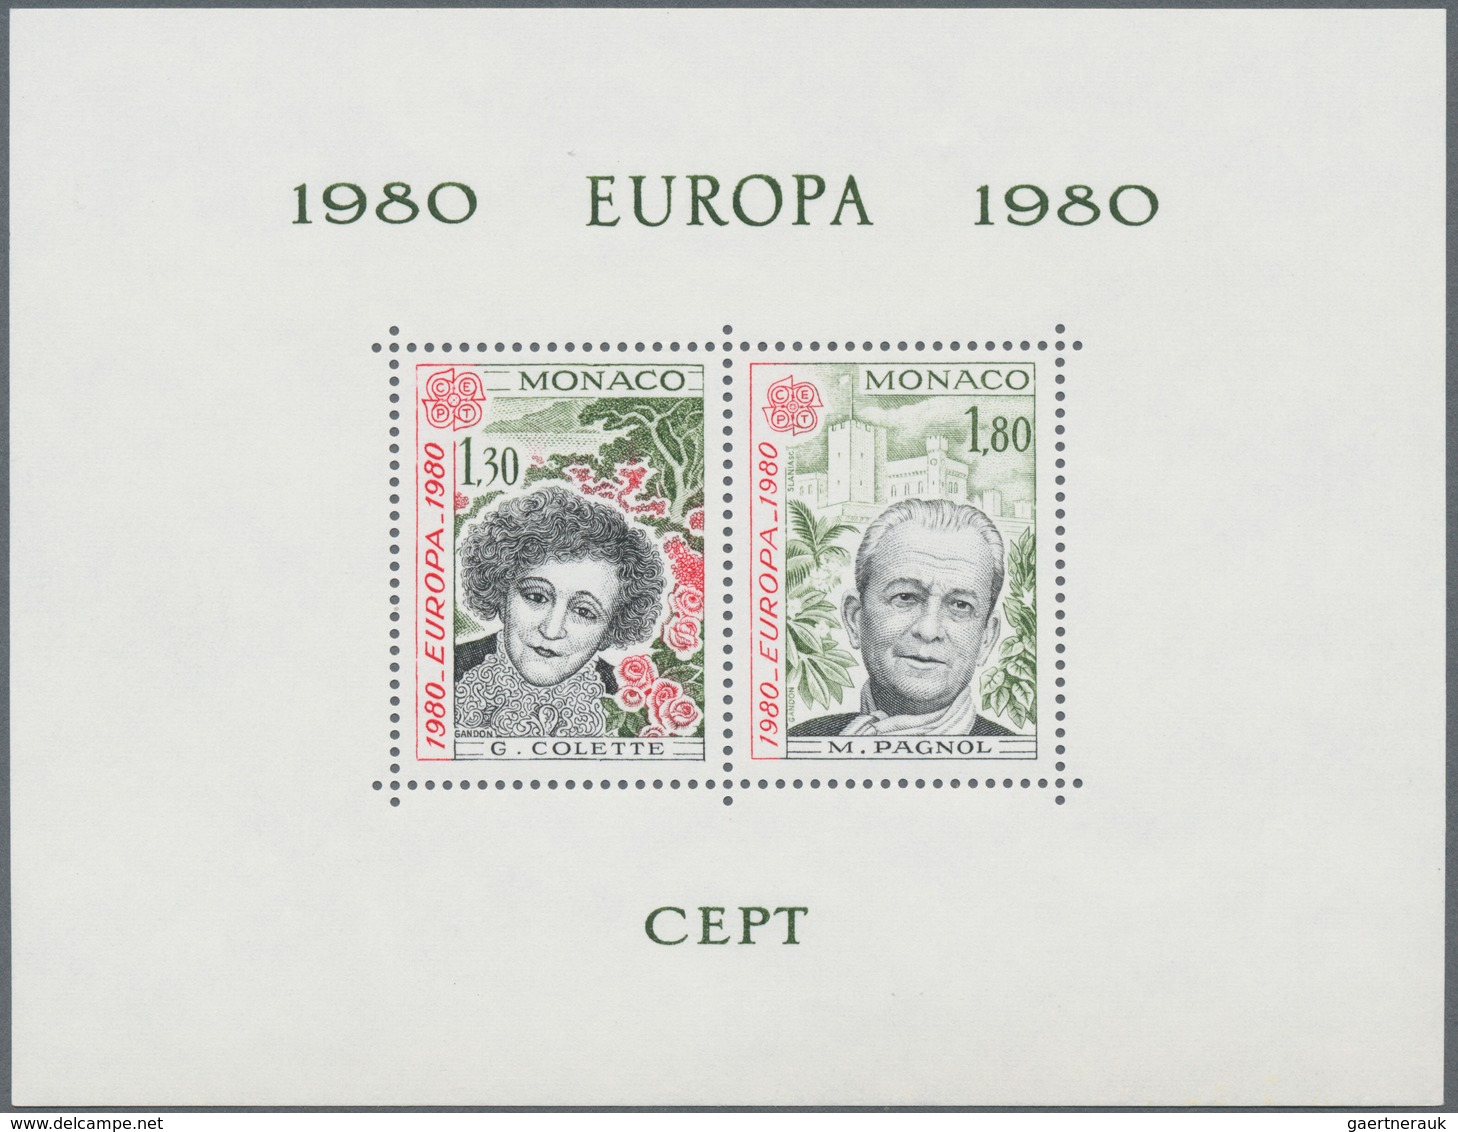 Monaco: 1980, Europa-CEPT 'Prominent Persons' Perforated Special Miniature Sheet, Mint Never Hinged - Ongebruikt